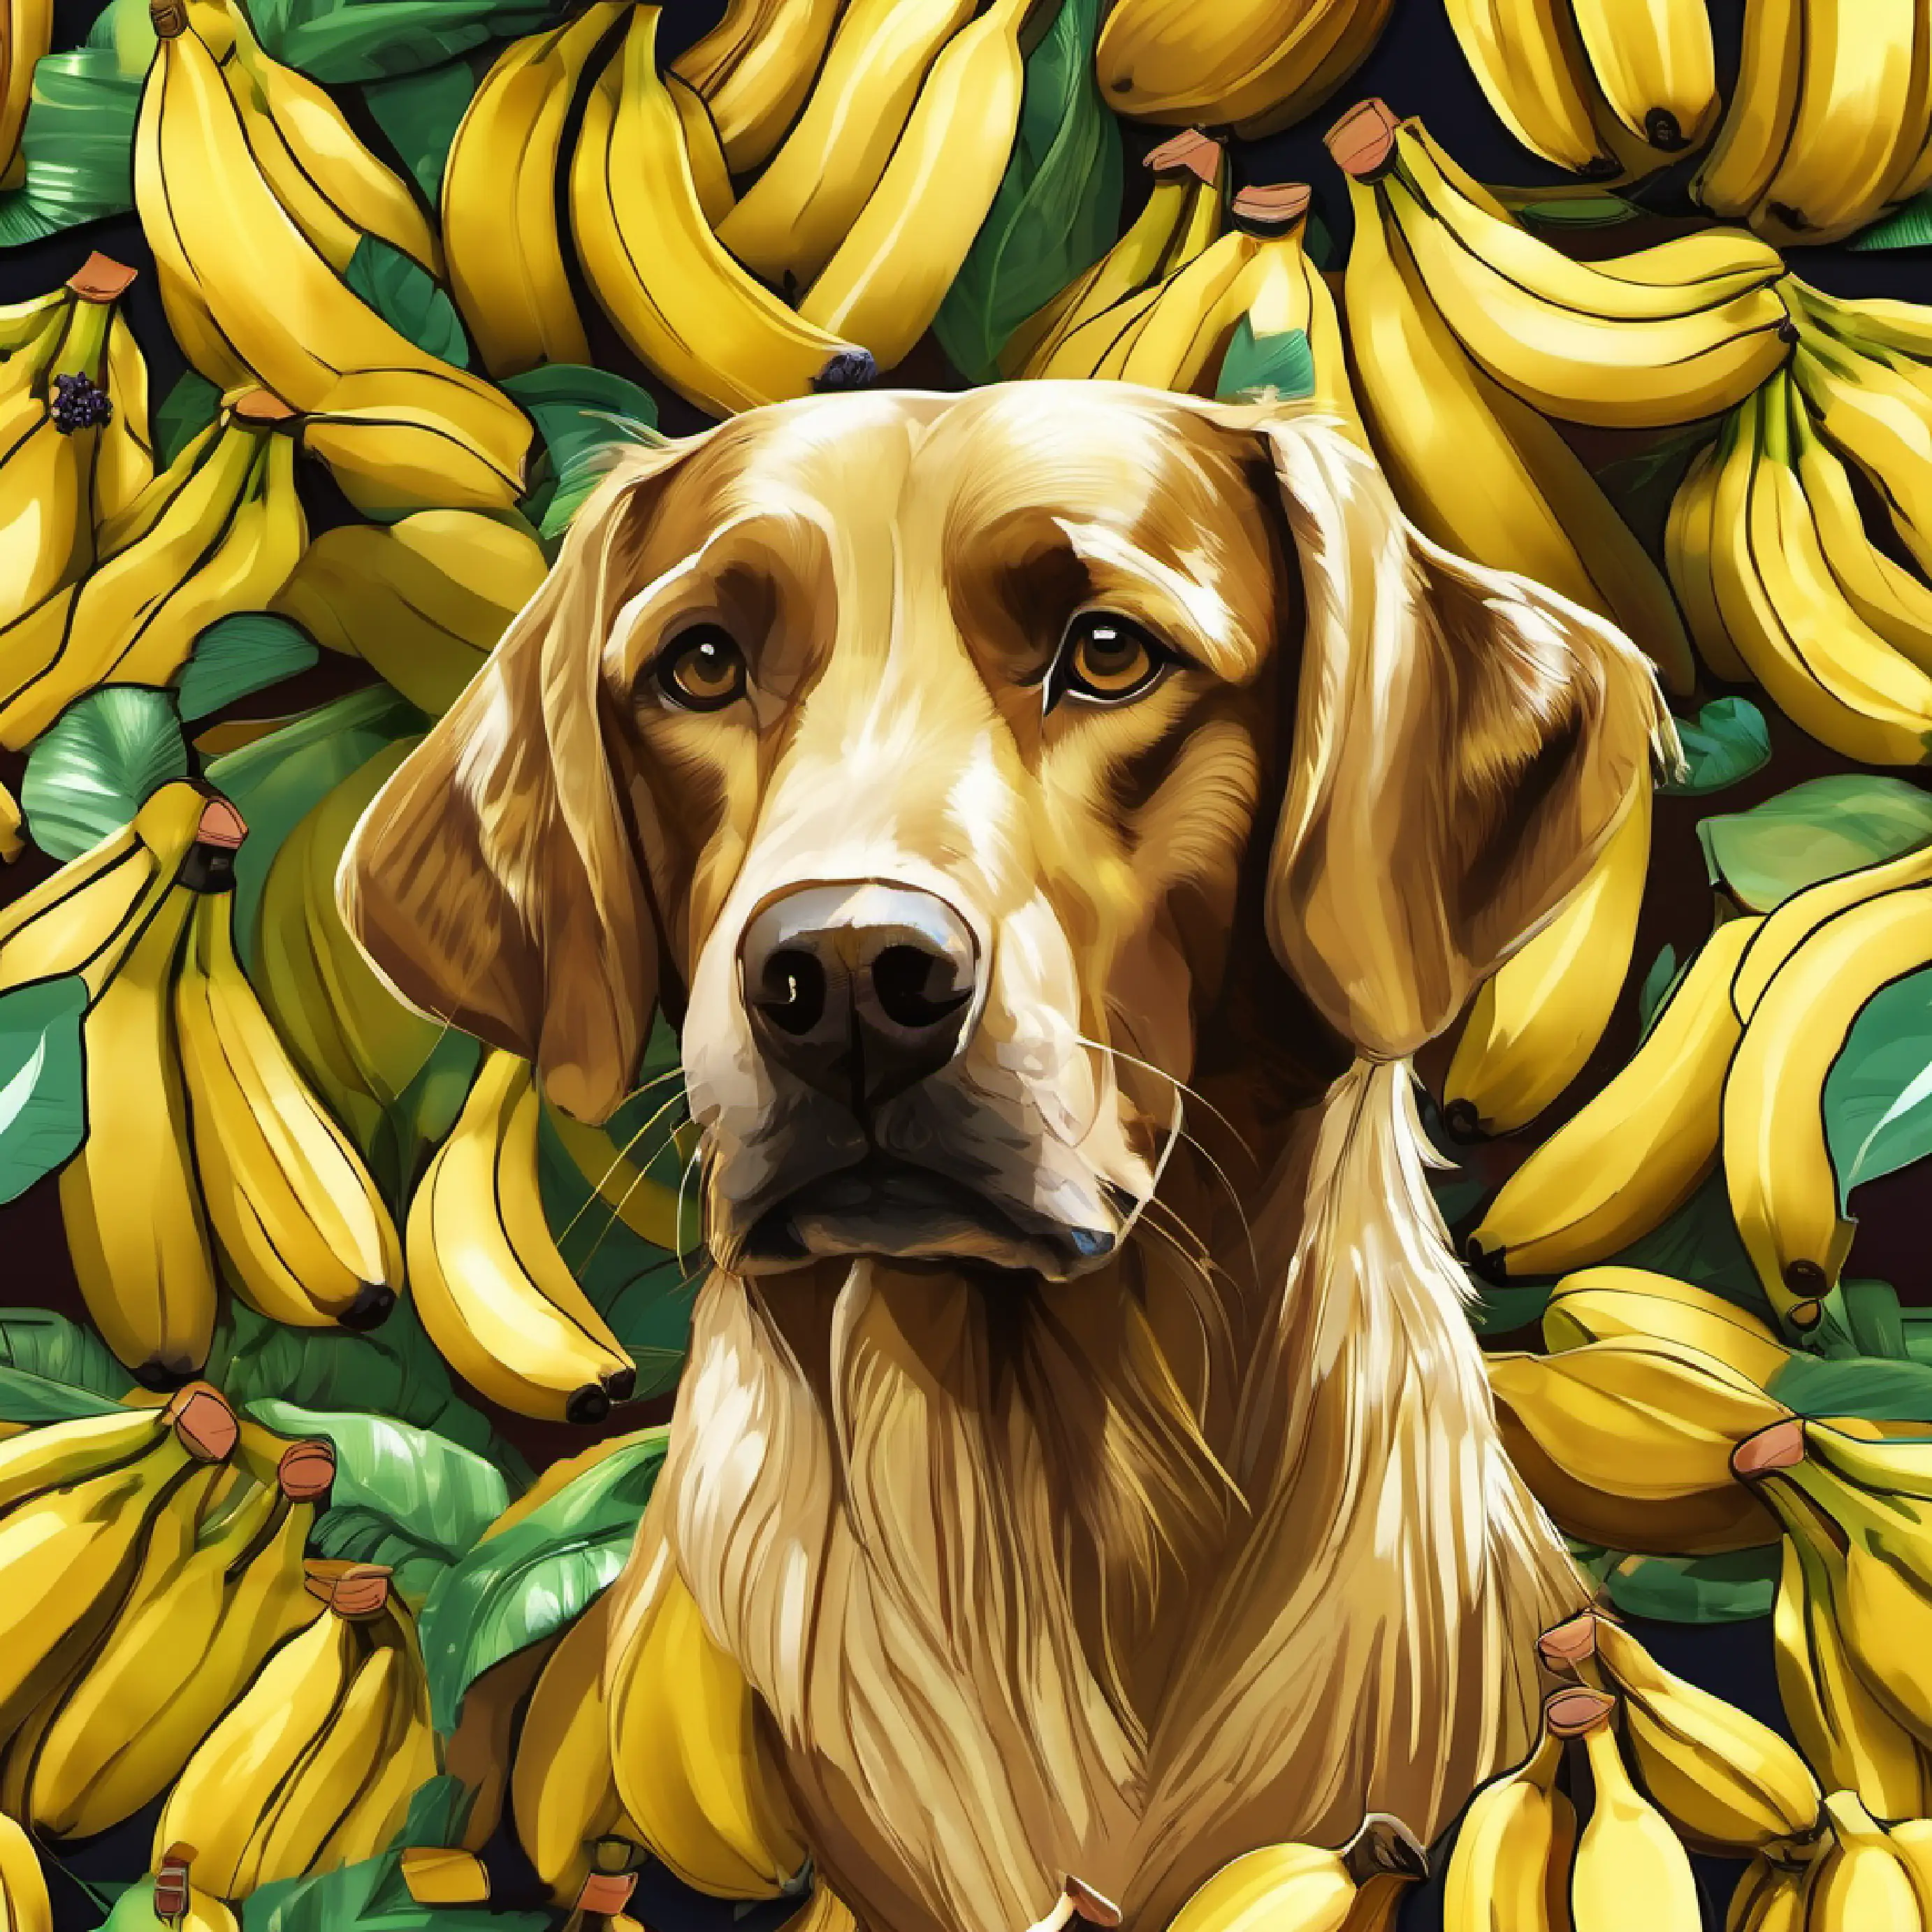 Golden coat, loves bananas, smart dog adds a level of complexity to his game.